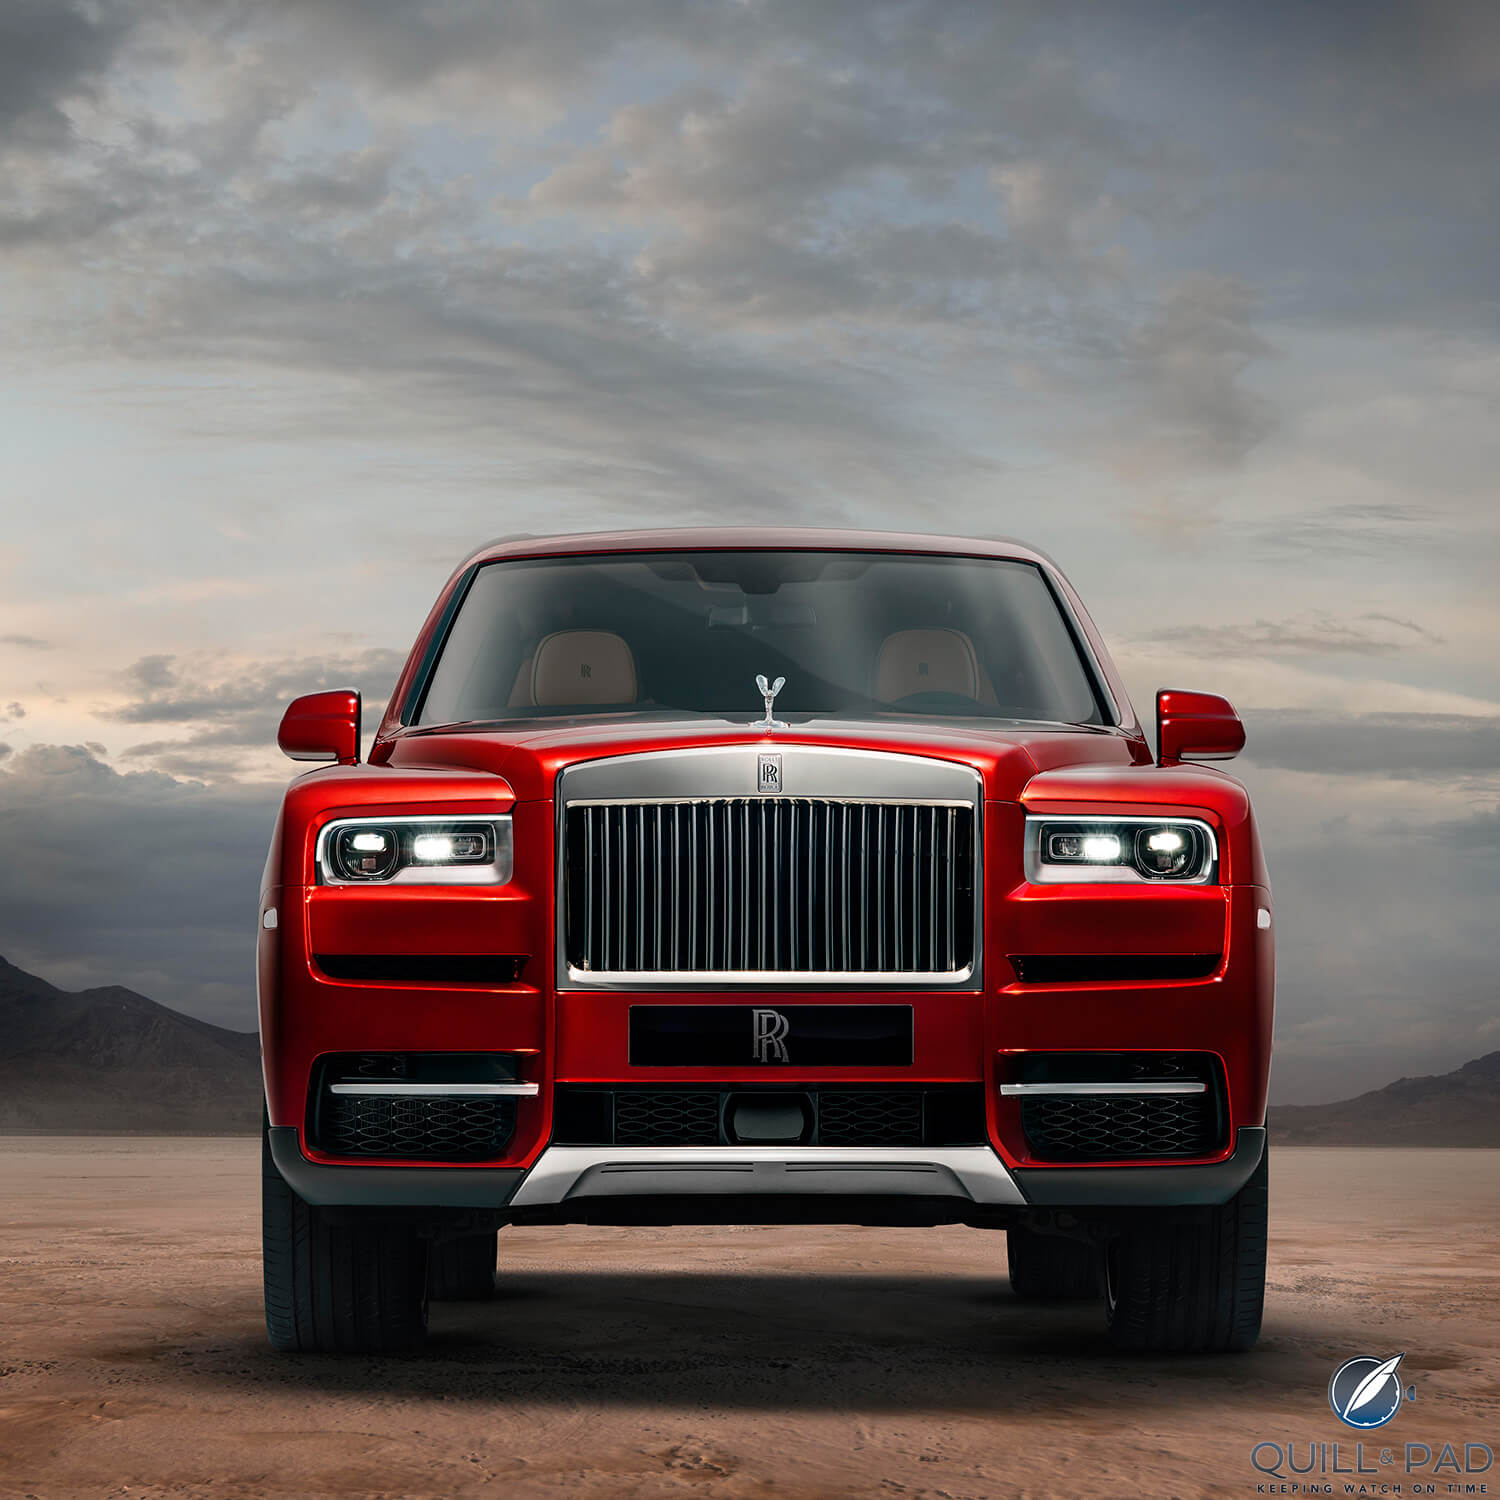 Imposing frontal view of the Rolls-Royce Cullinan